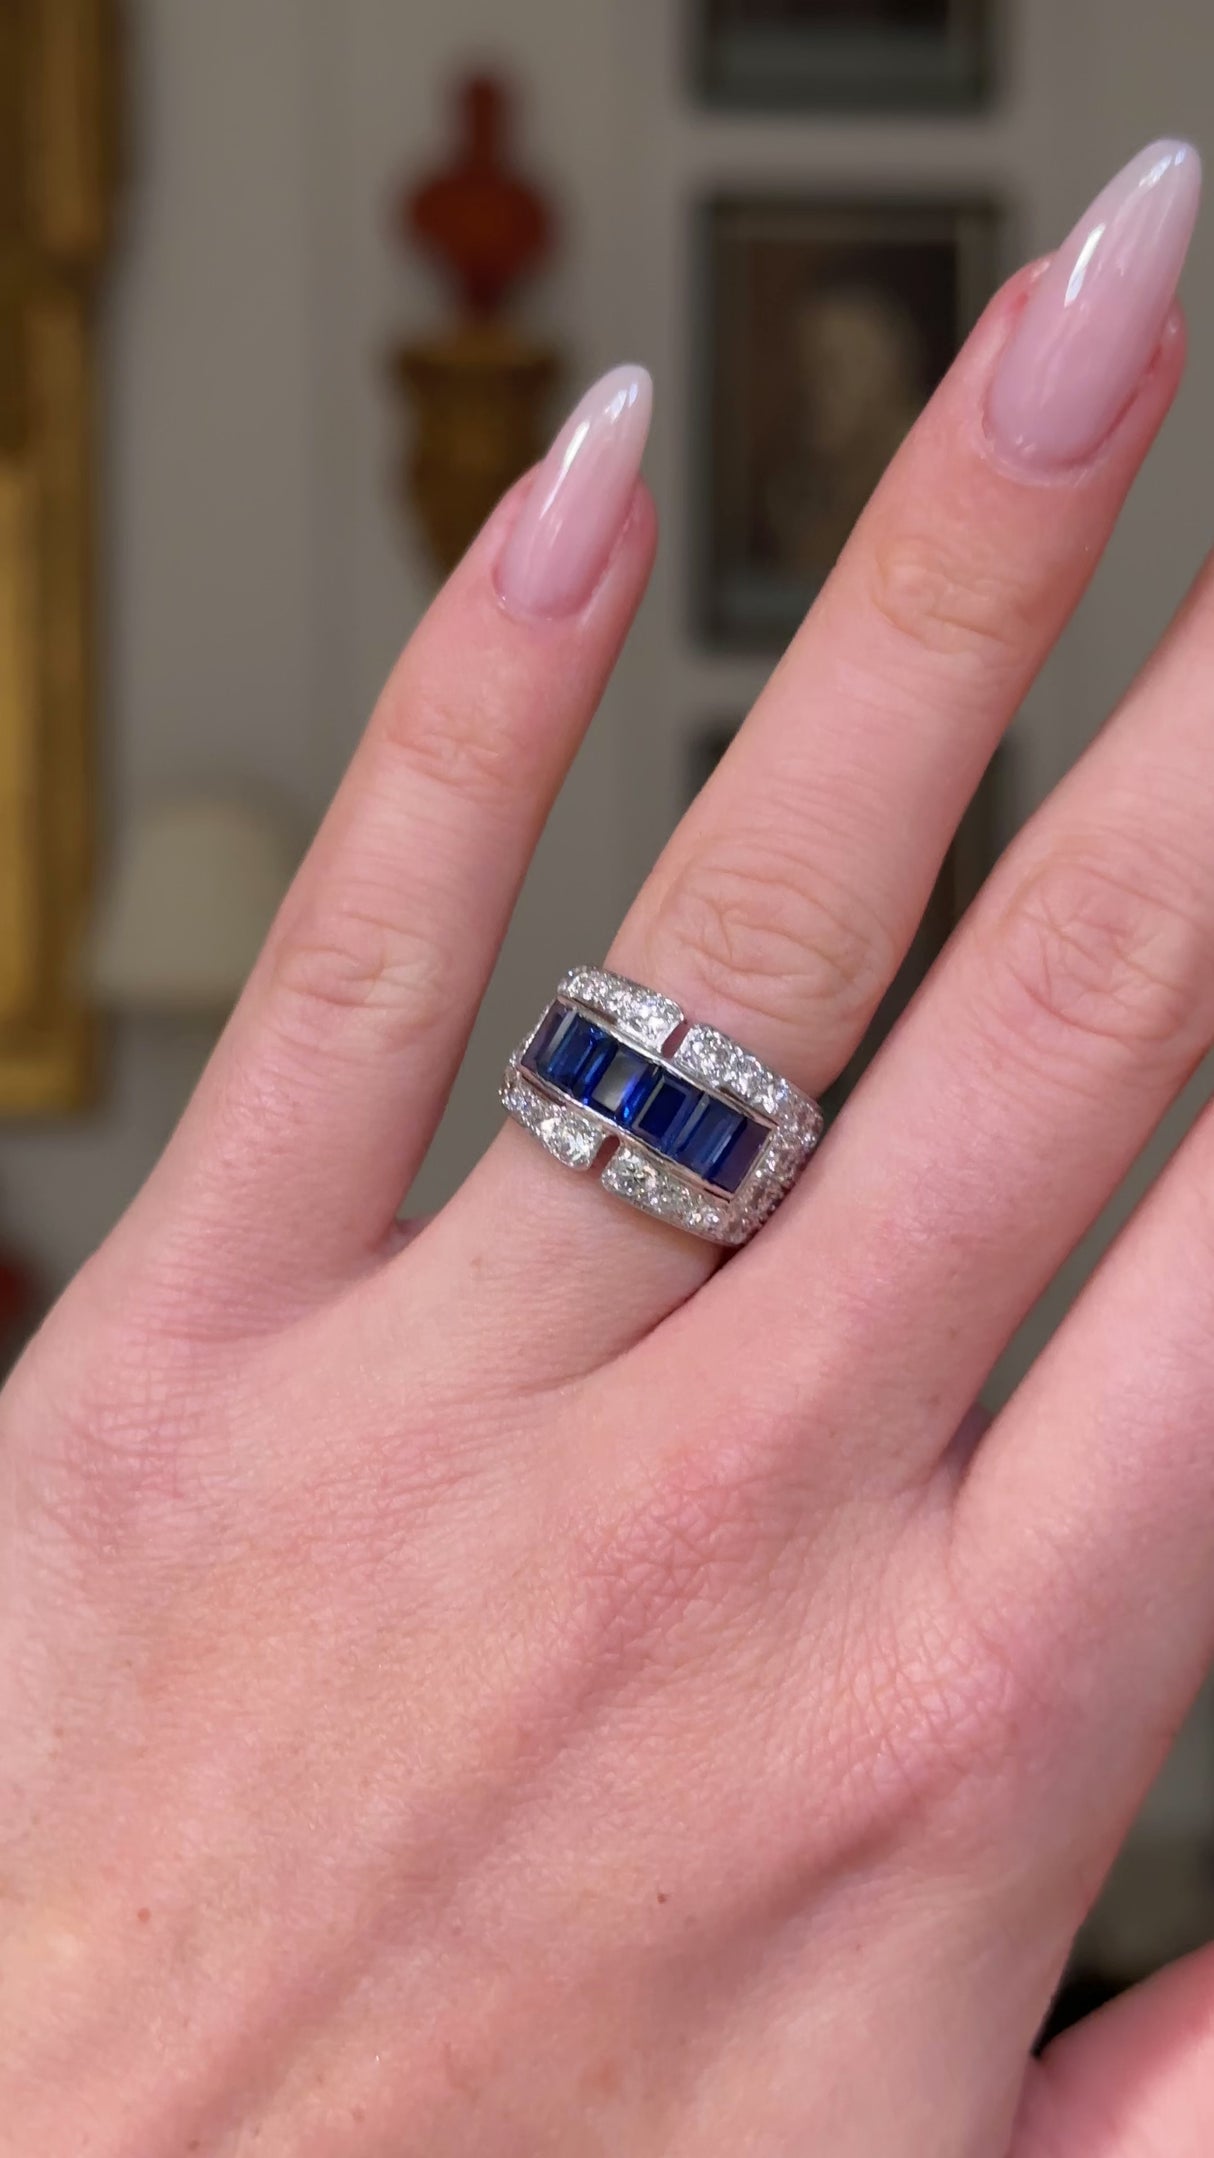 Sapphire and diamond Art Deco Band, worn on hand and moved away from lens to give perspective.